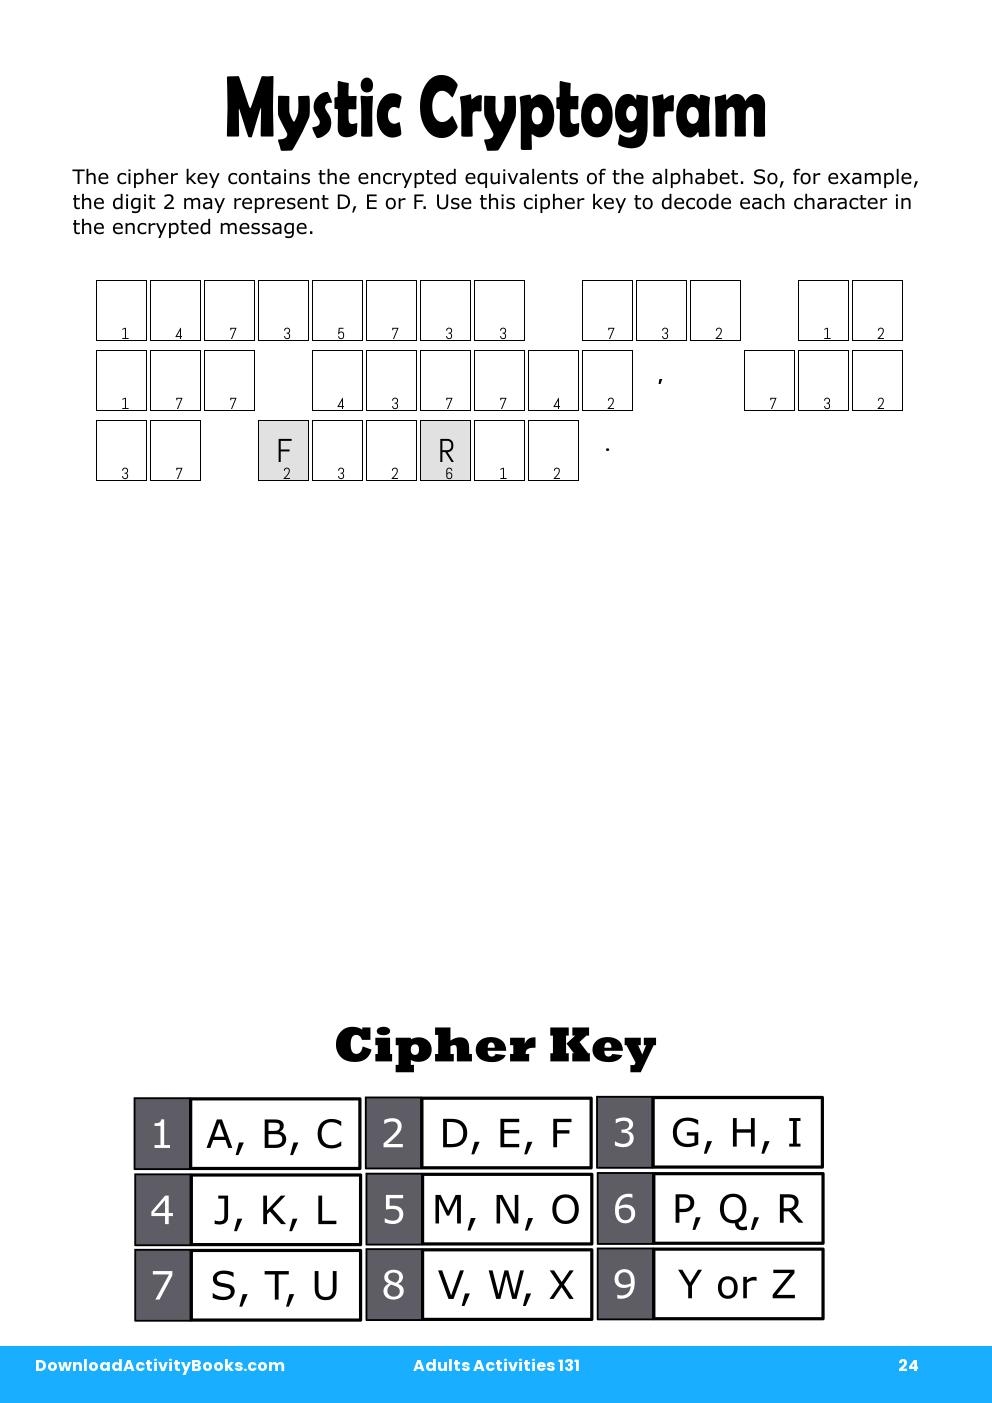 Mystic Cryptogram in Adults Activities 131